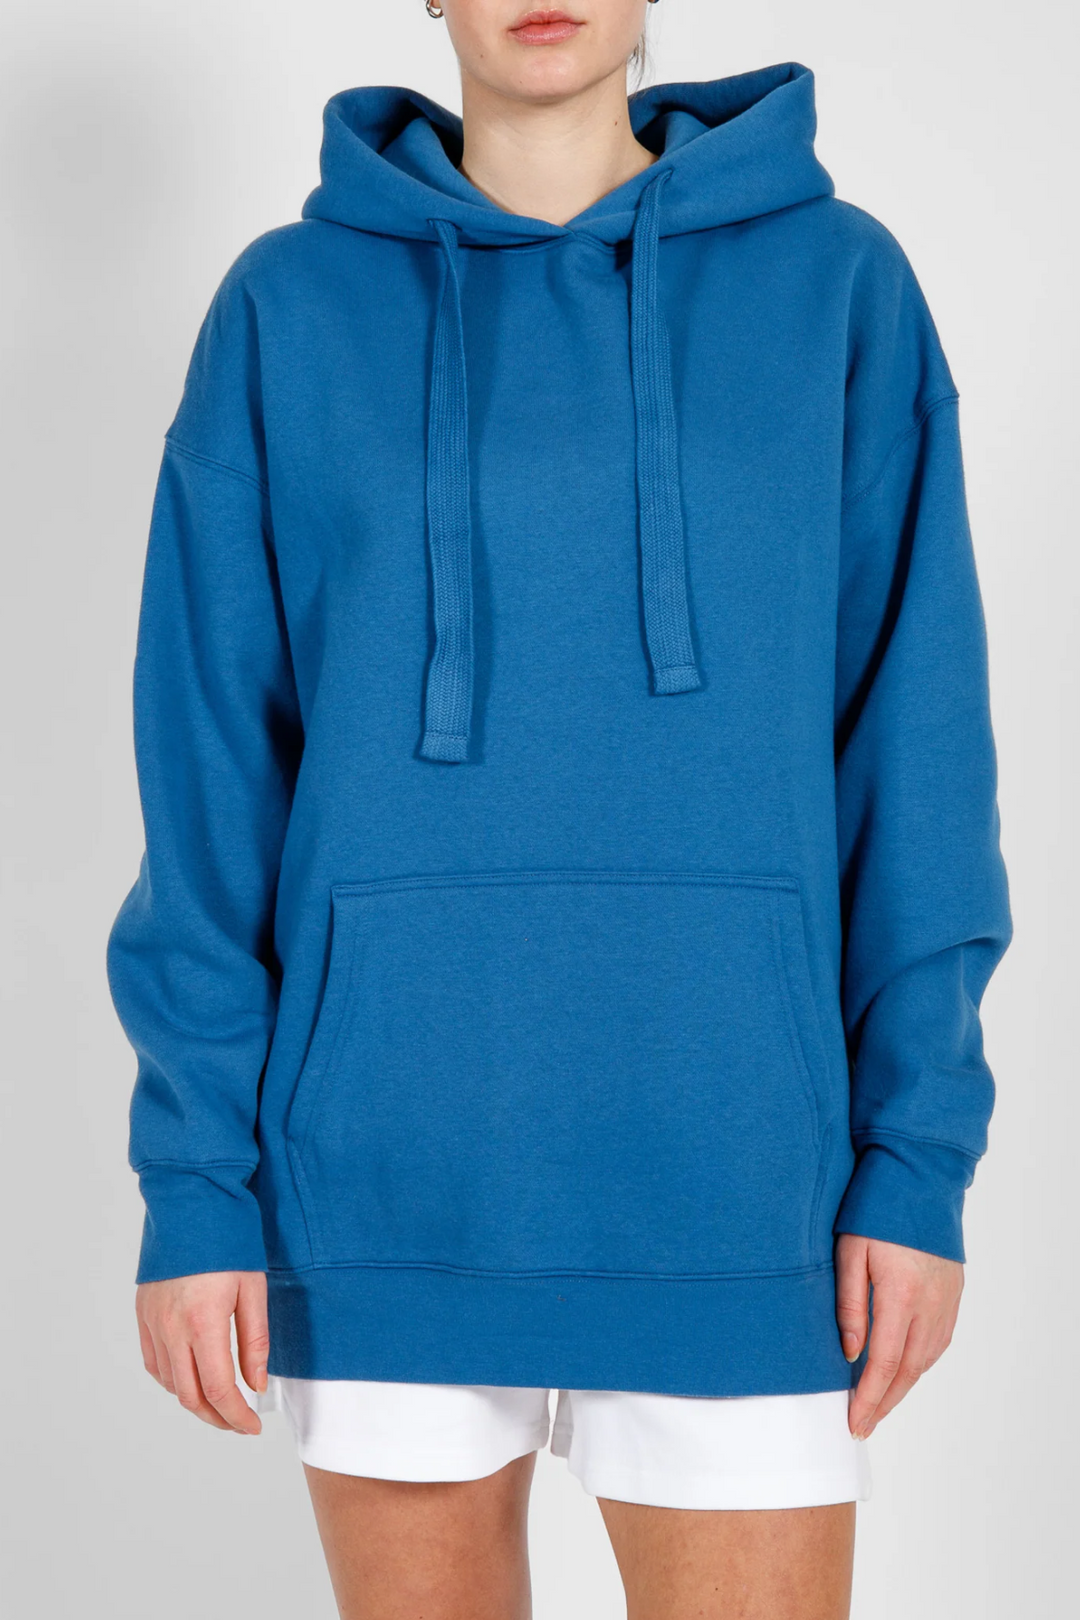 “The "PROGRESS OVER PERFECTION" Big Sister Hoodie | French Blue